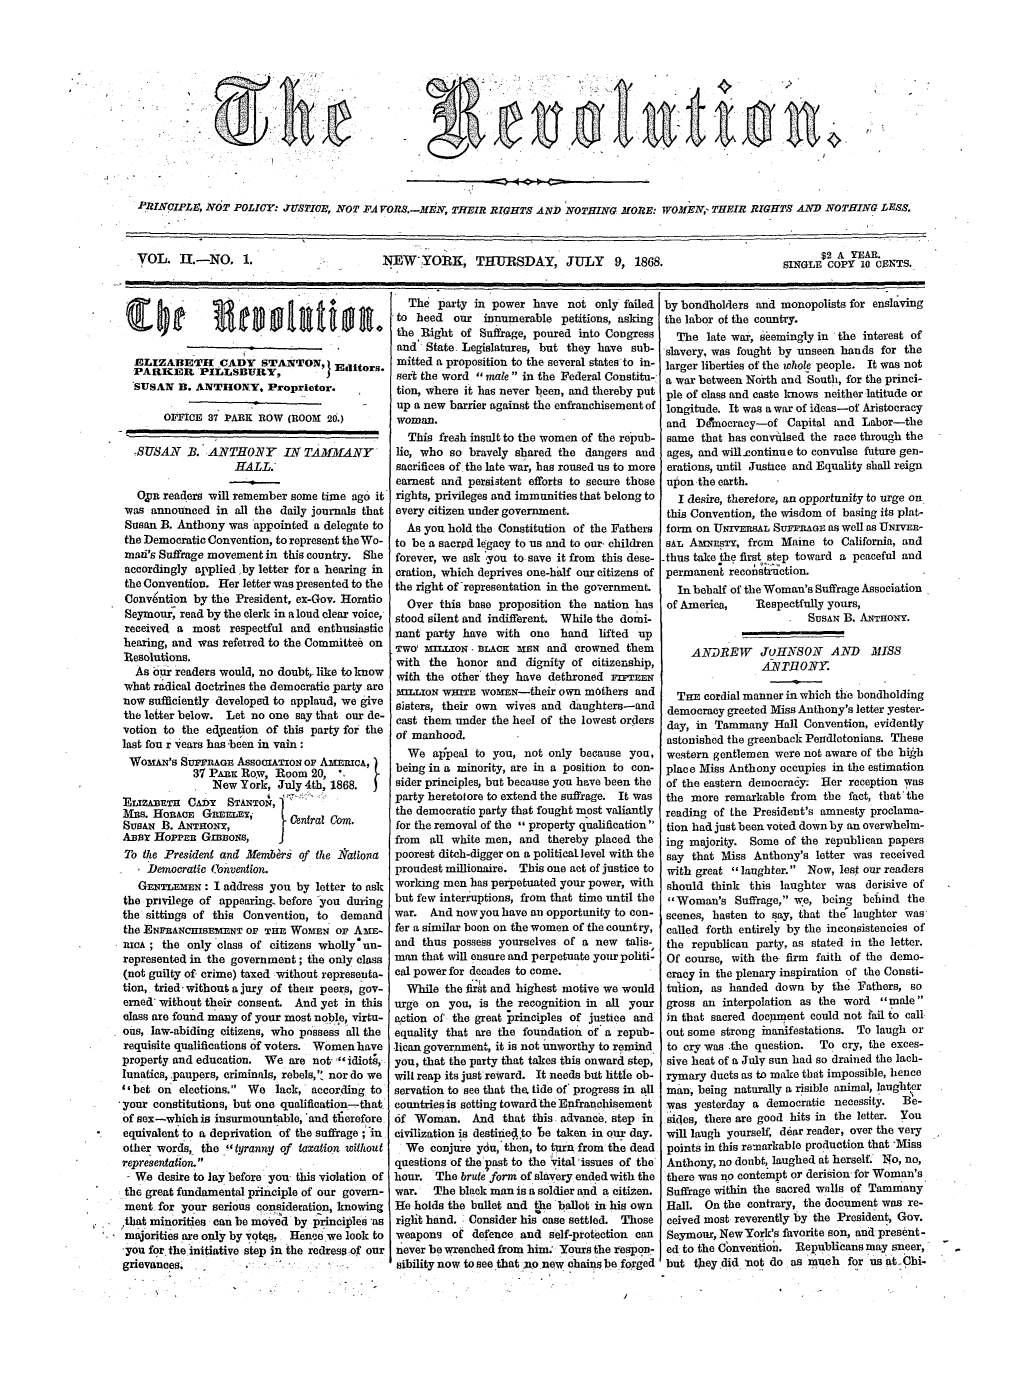 handle is hein.peggy/revol0002 and id is 1 raw text is: PRINCIPLE, NOT POLICY: JUS2IOE, NOT PA VOR.- EN, THEIR RIGHTS AND NOTHING MORE: WOM'EN, THEIR RIGHTS AND NOTHING LESS.
VOL. 1.-NO. 1.                    NEW'YORR, THURSDAY, JULY 9, 1868.                         SINGLES2 A YE AR.
E COPY 10 CENTS.

The party in power have not only failed
el     '                              to heed   our innumerable petitions, asking
the ,Right of Suffrage, poured into Congress
and State Legislatures, but they have sub-
ELIZABETI[ CADY STANTON, Editors. mitted a proposition to the several states to in-
PARICER PILLSBURY,               J         sei the word male in the Federal Constitu-
SUSAN B. ANTHONY. Proprietor.                tion, where it has never been, and thereby put
up a new barrier against the enfranchisement of
OFIthIcE 37 PARK ROW (ROOM 20.)         woman.
This fresh insult to the women of the repub-
SUSAN iB. ANTHONY         IN TAMMANY         lie, who so bravely shared the dangers and
HALL.                       sacrifices of the late war, has roused us to more
earnest and persistent efforts to secure those
O, pn readers -will remember some time ago it rights, privileges and immunities that belong to
was announced in all the daily journals that every citizen under government.
Susan B. Anthony was appointed a delegate to    As you hold the Constitution of the Fathers
the Democratic Convention, to represent the Wo- to be a sacred legacy to us and to our, children
mad's Suffrage movement in this country. She  forever, we ask You to save it from this dese-
accordingly applied ,by letter for a hearing in oration, which deprives one-half our citizens of
the Convention. Her letter was presented to the  the right of representation in the government.
Convention by the President, ex-Gov. Horatio    Over this base proposition the nation has
Seymour, read by the clerk in aloud clear voice, stood silent and indifferent. While the dotai-
received a most respectful and enthusiastic   nant party have with one hand      lifted up
hearing, and was referred to the Committee on  Two mrLo il.AcK     =-N and crowned them
Resolutions.                                   with the honor and dignity of citizenship,
As our readers would, no doubt,. like to know  with the other' they have dethroned  nnFnr
what radical doctrines the democratic party are  MILLION WHITE WOmrn-their own mothers and
now sufficiently developed to applaud, we give sisters, their own wives and daughters-and
the letter below. Let no one say that our de- cast them under the heel of the lowest orlers
votion to the edjication of this party for the  of manhood.
last fon r years has 'been in vain :
We appeal to you, not only because you,
Wowl'S SuFRAGE AssocIATION or AO   n , I   being in a minority, are in a position to con-
37 PAnic Row, Room 20, 
New York, July 4th, 1868.      sider principles, but because you have been the
ELIZABETU C AD        '                party heretotore to extend the suffrage. It was
Ertz~rT  CA:OY  STANTON, ] e
Mus. HoRAcE G     nmm  ,  1     a             the democratic party that fought most valiantly
SusAN B. ANTHoNY,             ral     m.       for the removal of the ,, property qualification
A]3]r HoPPER GIBBONS,      J                   from  all white men, and thereby placed the
To the President and Members of the l'ationa  poorest ditch-digger on a political level with the
Democratic Oonvention.                    proudest millionaire. This one act of justice to
GENTLEM x: I address you by letter to ask  working men has perpetuated your power, with
the privilege of appearing, before -you during  but few interruptions, from that time until the
the sittings of this Convention, to  demand    war. And now you have an opportunity to con-
the ENFRANCHISEMNT Or THE WOMEN oF AmE- fer a similar boon on the women of the country,
icA; the only class of citizens wholly'un-    and thus possess yourselves of a new talis-
represented in the government; the only class man that will ensure and perpetuate your politi-
(not guilty of crime) taxed :without representa- cal power for decades to come.
tion, tried without a jury of their peers, gov-  While the flr6t and highest motive we would
erned without their consent. And yet in this  urge on you, is the recognition in all your
class are found many of your most noble, virtu- action of the great principles of justice and
ous, law-abiding citizens, who possess all the equality that are the foundation of a repub-
requisite qualifications of voters. Women have  lican government, it is not unworthy to remind
property and education. We are not-idiot;, you, that the party that takes this onward step,
lunatics, paupers, criminals, rebels,' nor do we  will reap its just'reWard. It needs btt little oh-
bet on elections. We lack, according to      servation to see that thbe tide of' progress in all
'your constitutions, but one qualification- that countries is setting toward the Enfranchisement
of sex-whichis insurmountable, 'and thnerefore  of Woman. And that this advance, step in
equivalent to a deprivation of the suffrage ; in  civilization is destiiie4to be taken in our day.
other words, the tyranny of taxation without   We conjure ydu, then, to turn from the dead
representation.               .               questions of the Vast to the ital 'issues of the
We desire to lay before you this violation of hour. The brute form of slaveryended with the
the great fundamental principle of our govern- war.  The black man is a soldier and a citizen.
ment for your serious consideration, knowing He holds the bullet and the ballot in his own
,that minorities can be moved by principles as  riglt hand. Consider his case settled. Those
majorities are only by vots, Henca we look to  weapons of defence and self-protection can
-you for the initiative step in the redress of our never be wrenched from him. Yours the respon-
grievances.              . '       '           sibility now to see that -no new chains be forged

by bondholders and monopolists for enslaving
the labor of the country.
The late war, seemingly in the interest of
slavery, was fought by unseen hands for the
larger liberties of the whole people. It was not
a war between Norih and South, for the princi-
ple of class and caste knows neither latitude or
longitude. It was a war of ideas-of Aristocracy
and Ddnoracy-of Capital and Labor-the
same that has convulsed the race through the
ages, and willcontinue to convulse future gen-
erations, until Justice and Equality shall reign
upon the earth.
I desire, therefore, an opportunity to urge on
this Convention, the wisdom of basing its plat-
form on UNIVERSAL Surrma.o as well as UNrvEn-
SAL AmNsTy, from   Maine to California, and
-thus take the first step toward a peaceful and
permanent reconstruction.
In behalf of the Woman's Suffrage Association
of America,    Respectfully yours,
SusAw B. ANTHONY.
ANDREW JuJHINSON AND MISS
A VR ONY.
THE cordial manner in which the bondholding
democracy greeted Miss Anthony's letter yester-
day, in Tammany Hall Convention, evidently
astonished the greenback Peadletonians. These
western gentlemen were not aware of the hikh
place Miss Anthony occupies in the estimation
of the eastern democra6y; Her reception was
the more remarkable from the fact, that' the
reading of the President's amnesty proclama-
tion had just been voted down by an overwhelm-
ing majority. Some of the republican papers
say that Miss Anthony's letter was received
with great laughter. Now, lest our readers
should think this laughter was derisive of
Woman's Suffrage, we, being behind the
scenes, hasten to say, that the laughter was
called forth entirely by the inconsistencies of
the republican party, as stated in the letter.
Of course, with the- firm faith of the demo-
cracy in the plenary inspiration of the Consti-
tultion, as handed down by the Fathers, so
gross an interpolation as the word male
in that sacred docpiient could not f'ail to call
out some strong inanifestations. To laugh or
to cry was the question.  To cry, the exces-
sive heat of a July sun had so drained the lach-
rymary ducts as to make that impossible, hence
man, being naturally a risible animal, laughter
was yesterday a democratic necessity.   Be-
.sides, there are good hits in the letter. You
will laugh yourself, dear reader, over the very
points in this remarkable production that 'Miss
Anthony, no doubt, laughed at herself. No, no,
there was no contempt or derision for Woman's
Suffrage within the sacred walls of Tammany
Hall. On the contrary, the document was re-
ceived most reverently by the President, Gov.
Seymour, NewYork's favorite son, anl present-
ed to the Convention. Republicans may sneer,
but they did 'not do as much for us at(Jhi.

.               .


